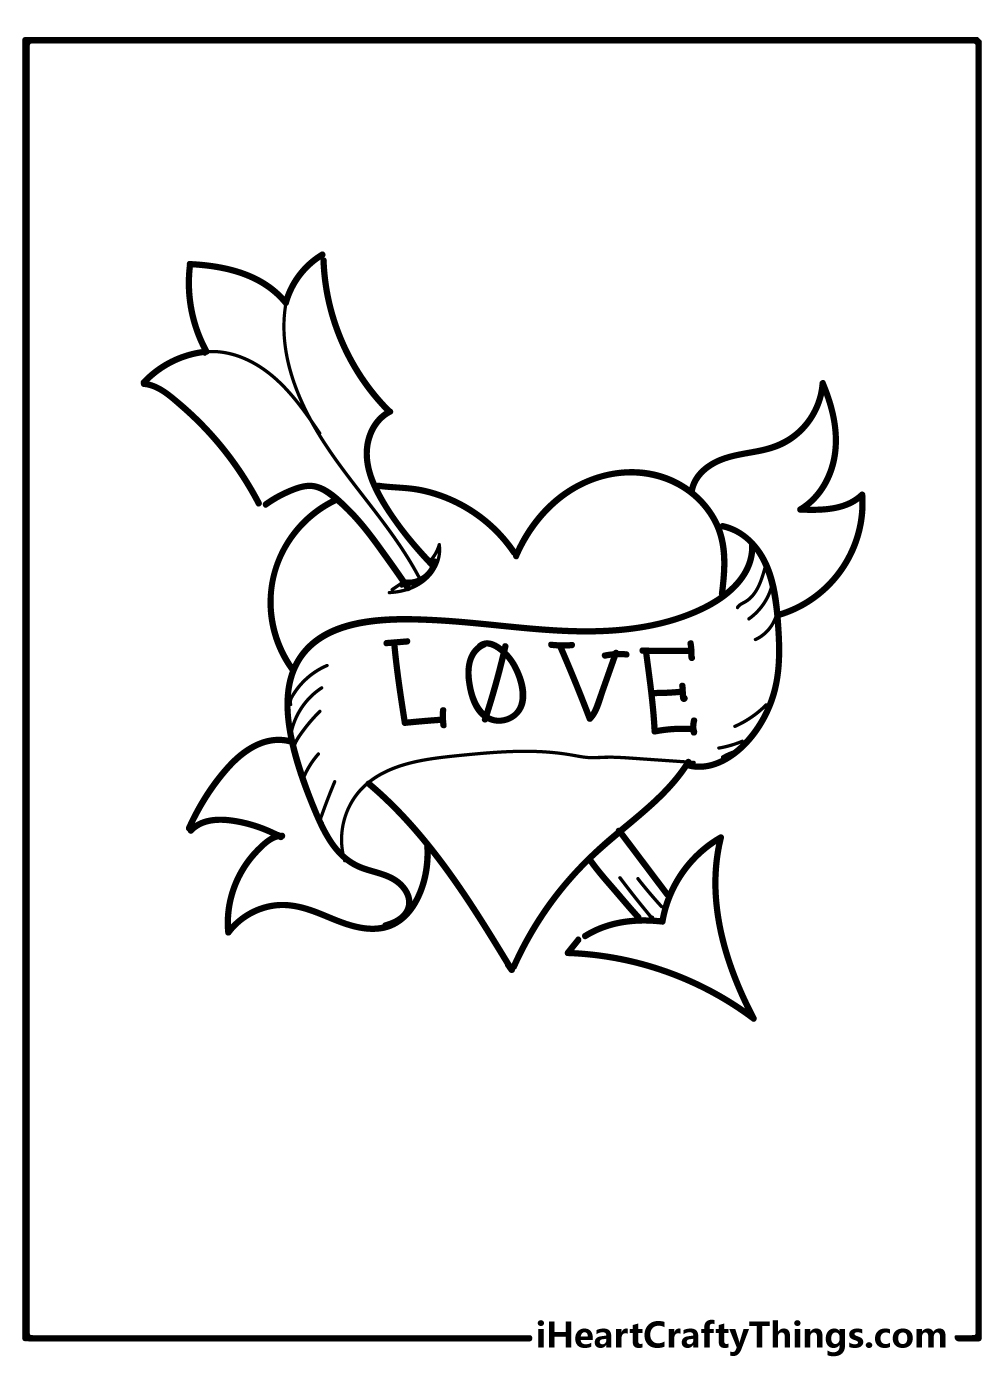 Tattoos Coloring Pages for kids free download